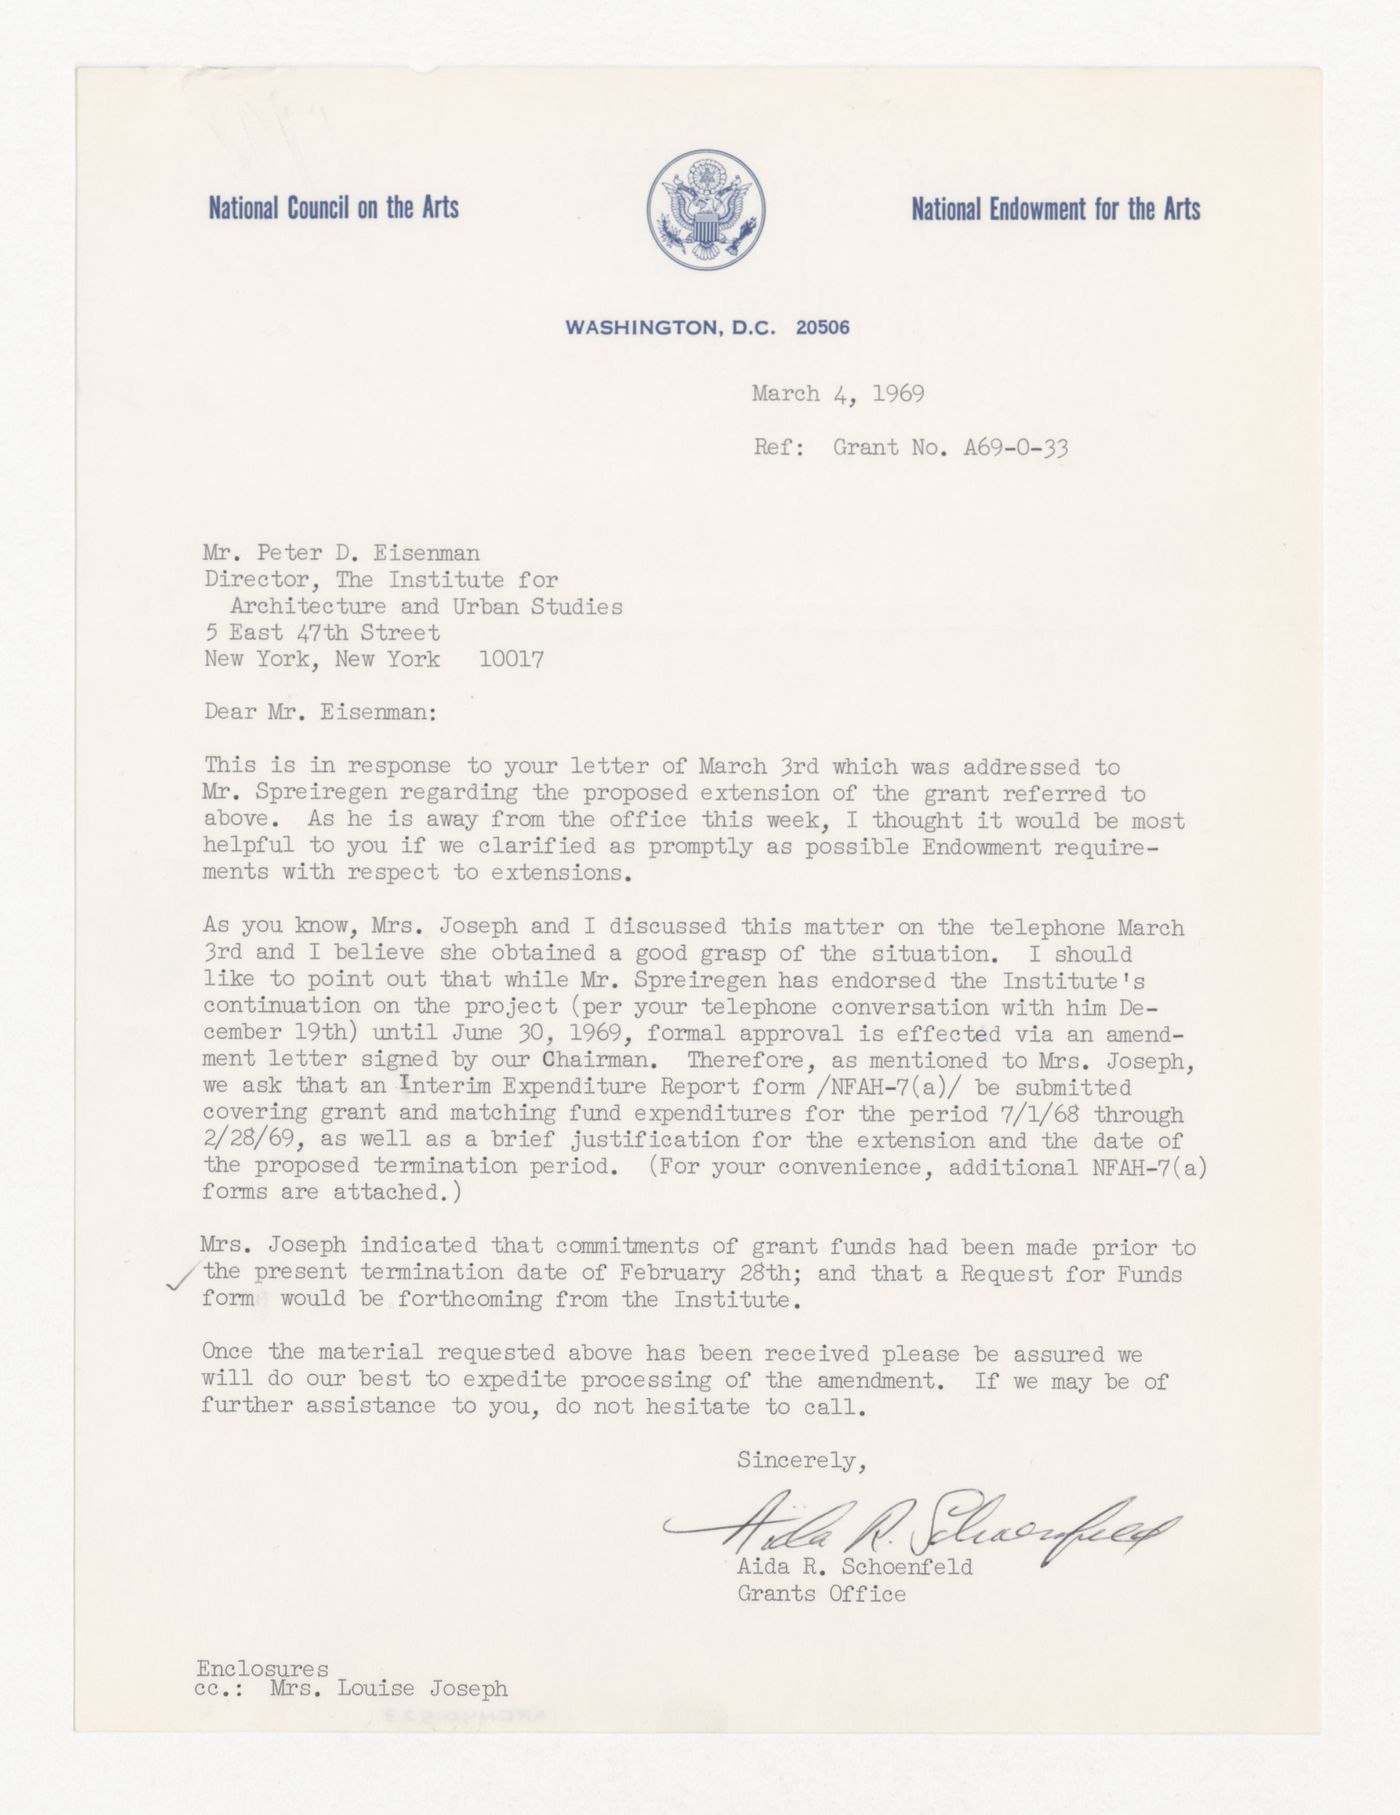 Letter from Aida R. Schoenfeld to Peter D. Eisenman about extension for project funded by the National Endowment for the Arts (NEA)